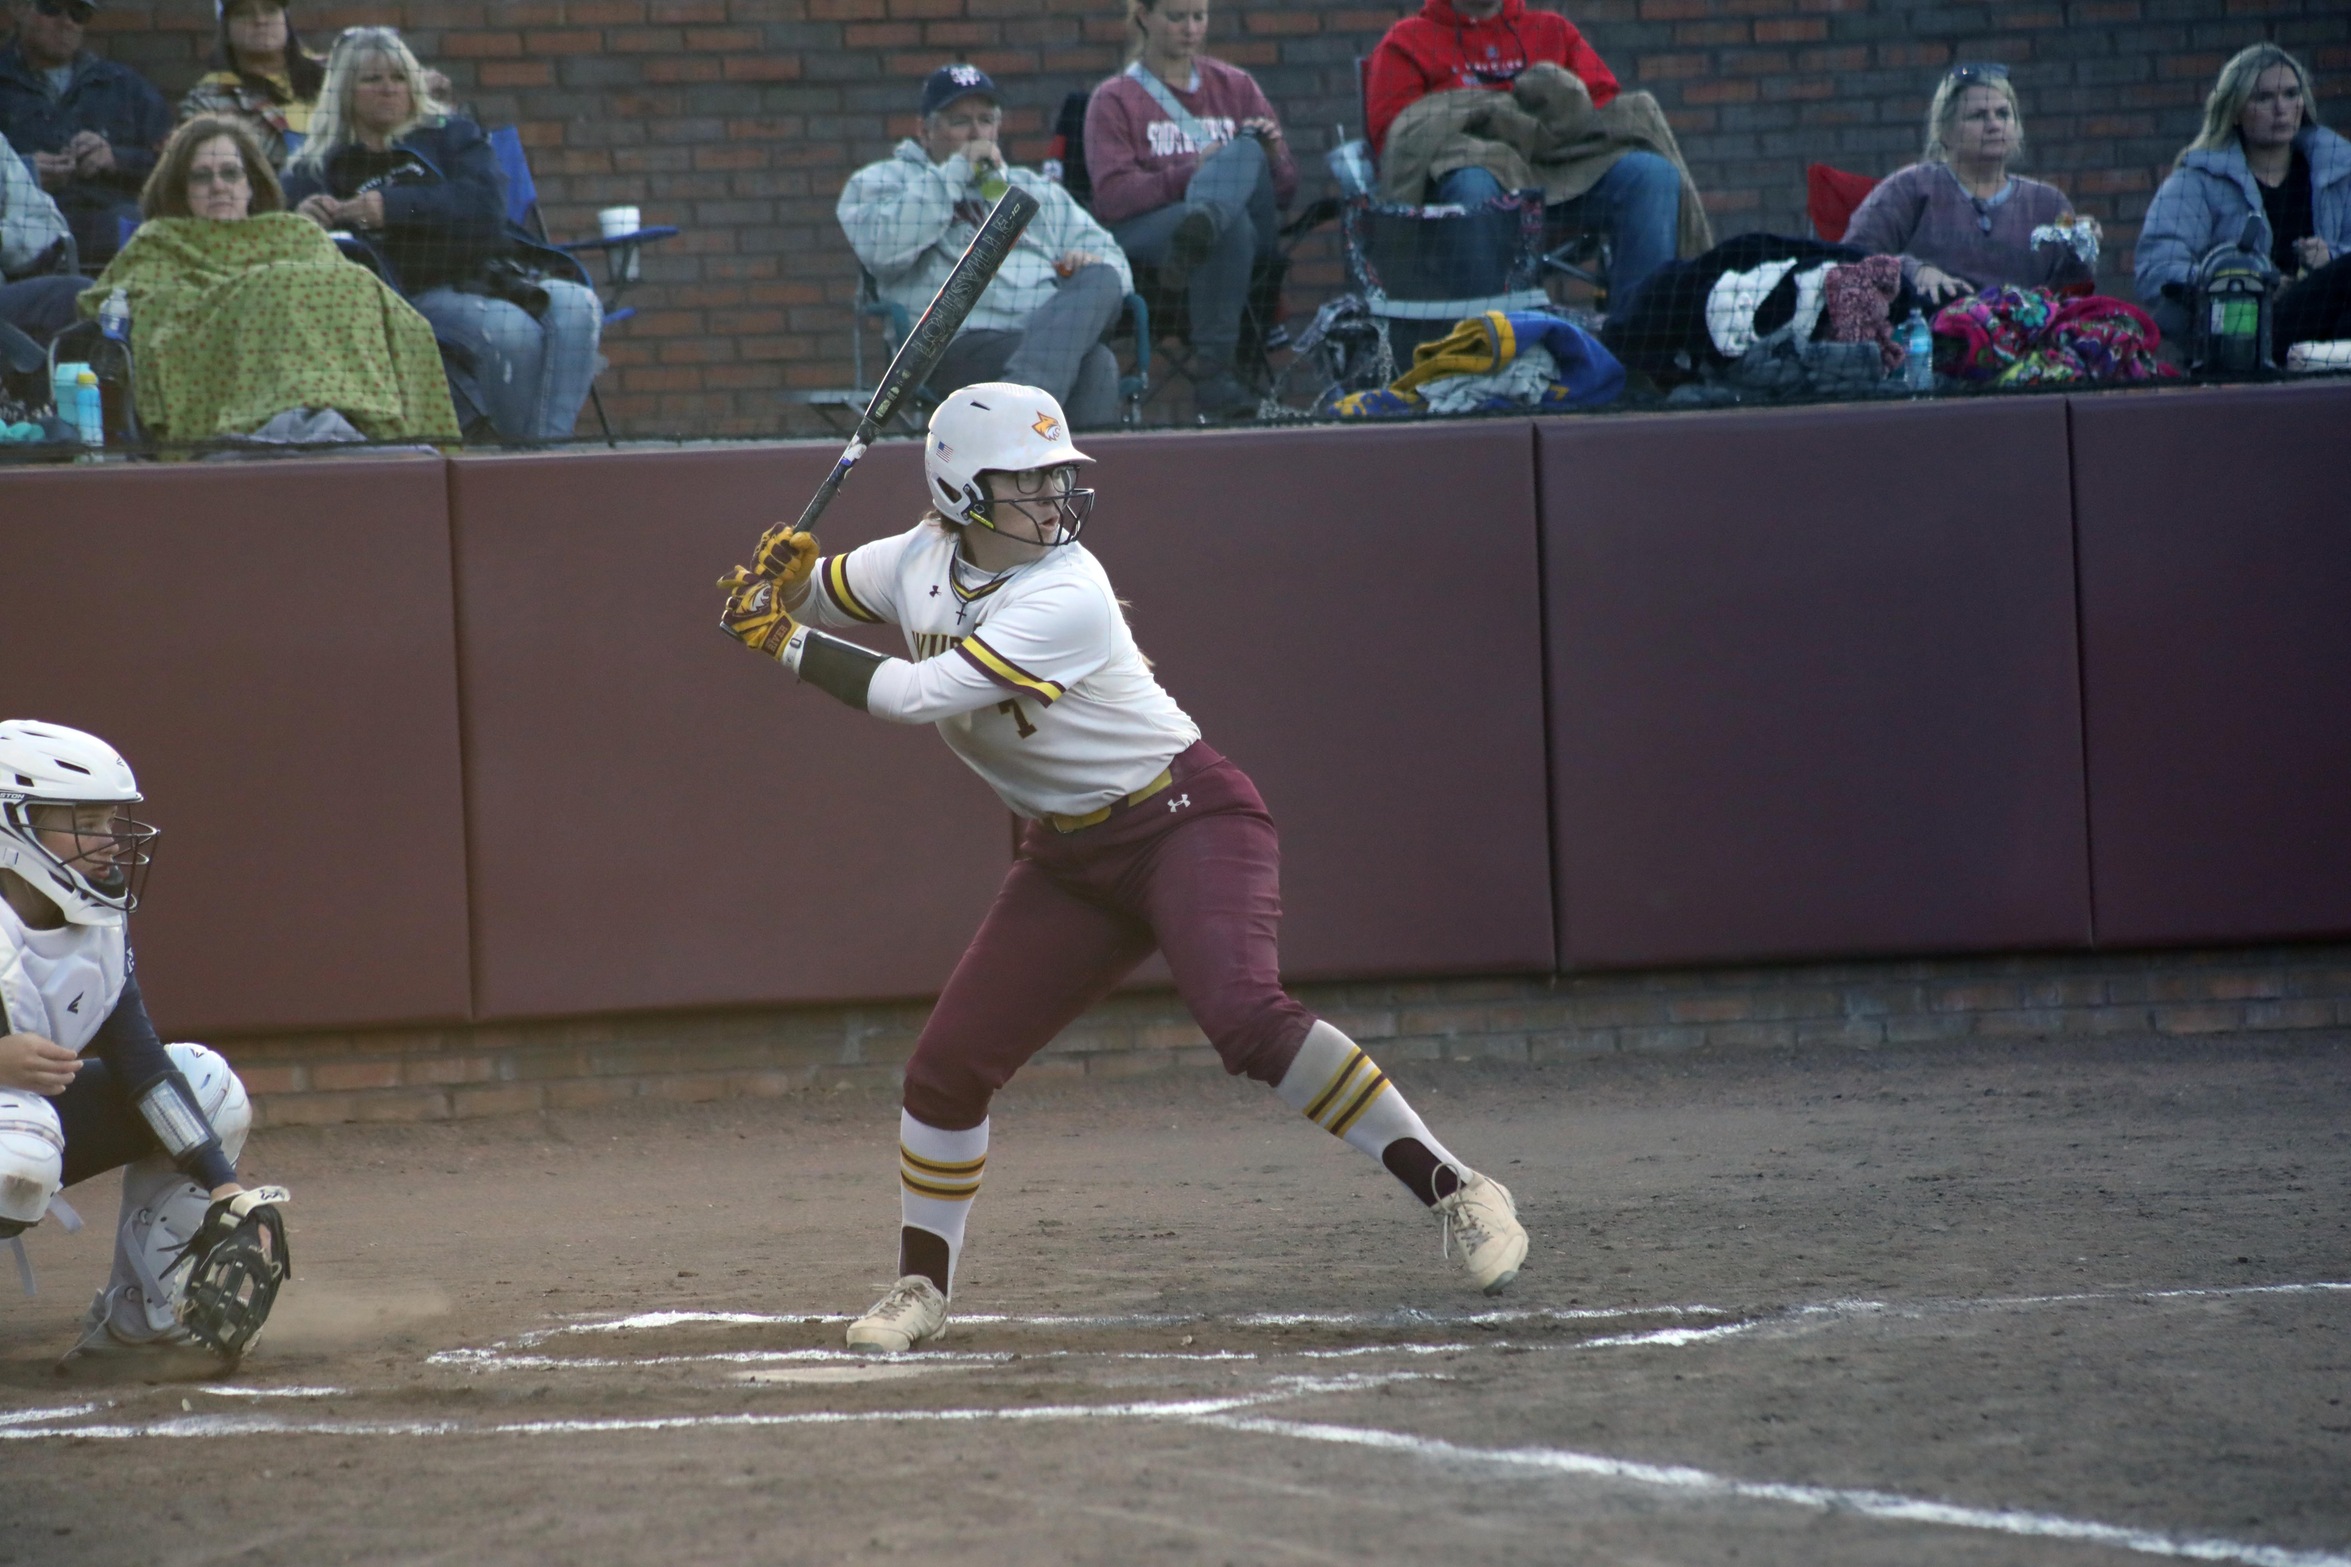 Julianah Overstreet’s walk-off home run lifts Pearl River in sweep over Southwest